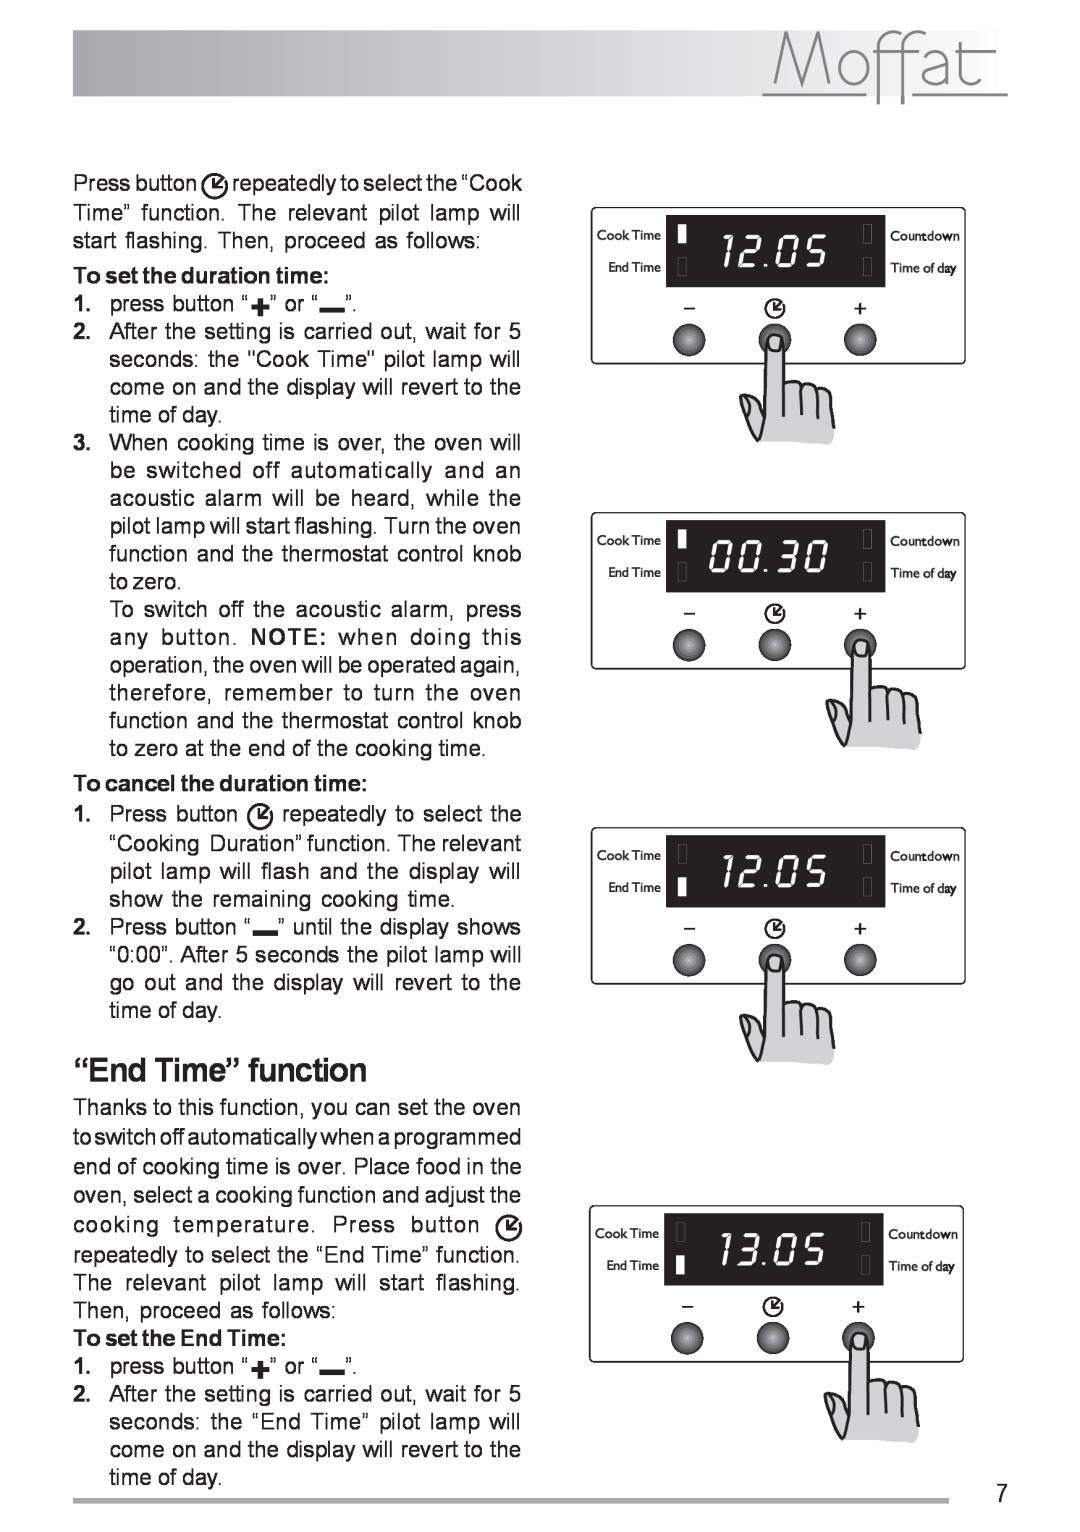 Moffat MSF 616 manual “End Time” function, To set the duration time, To cancel the duration time, To set the End Time 